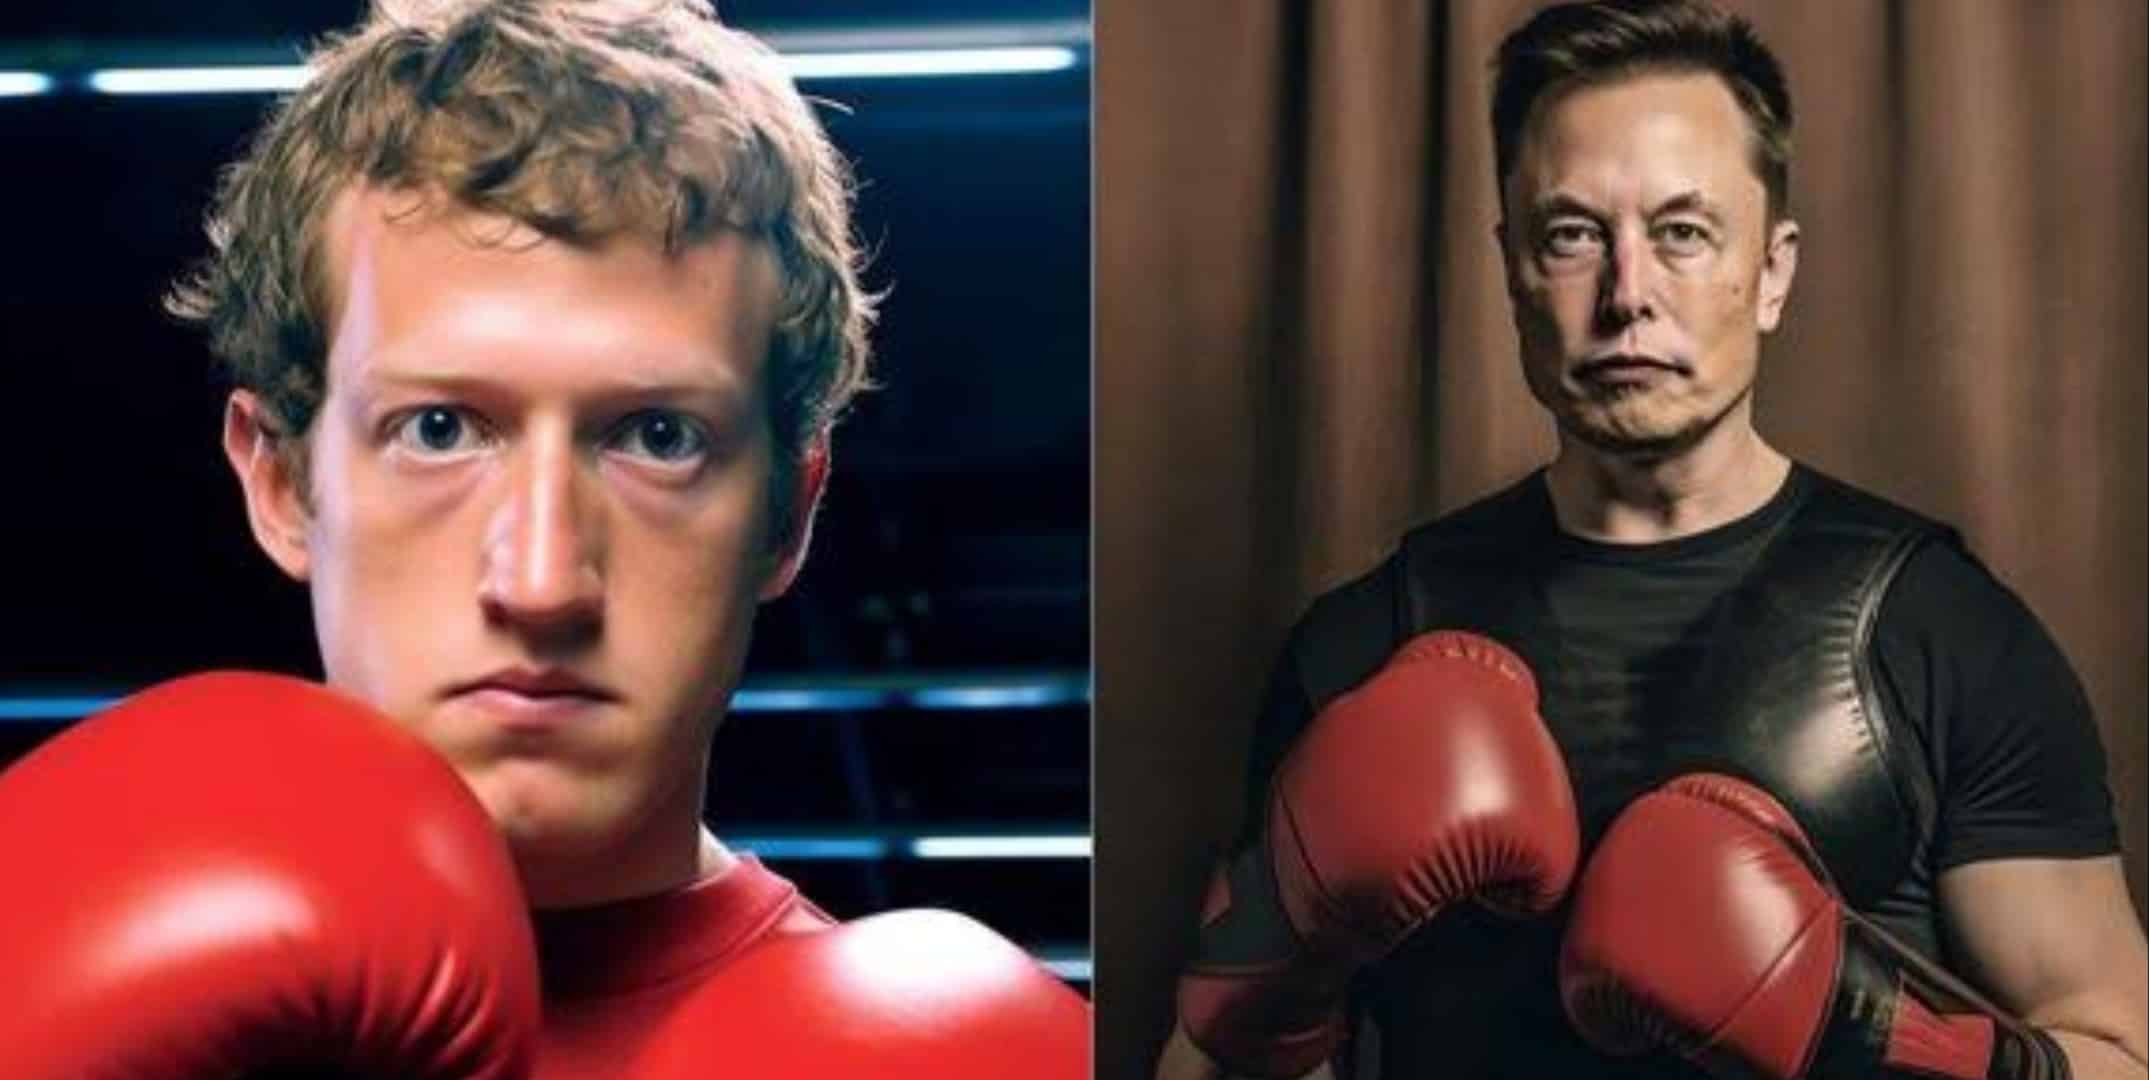 Mark Zuckerberg accepts Elon Musk’s challenge to a cage fight